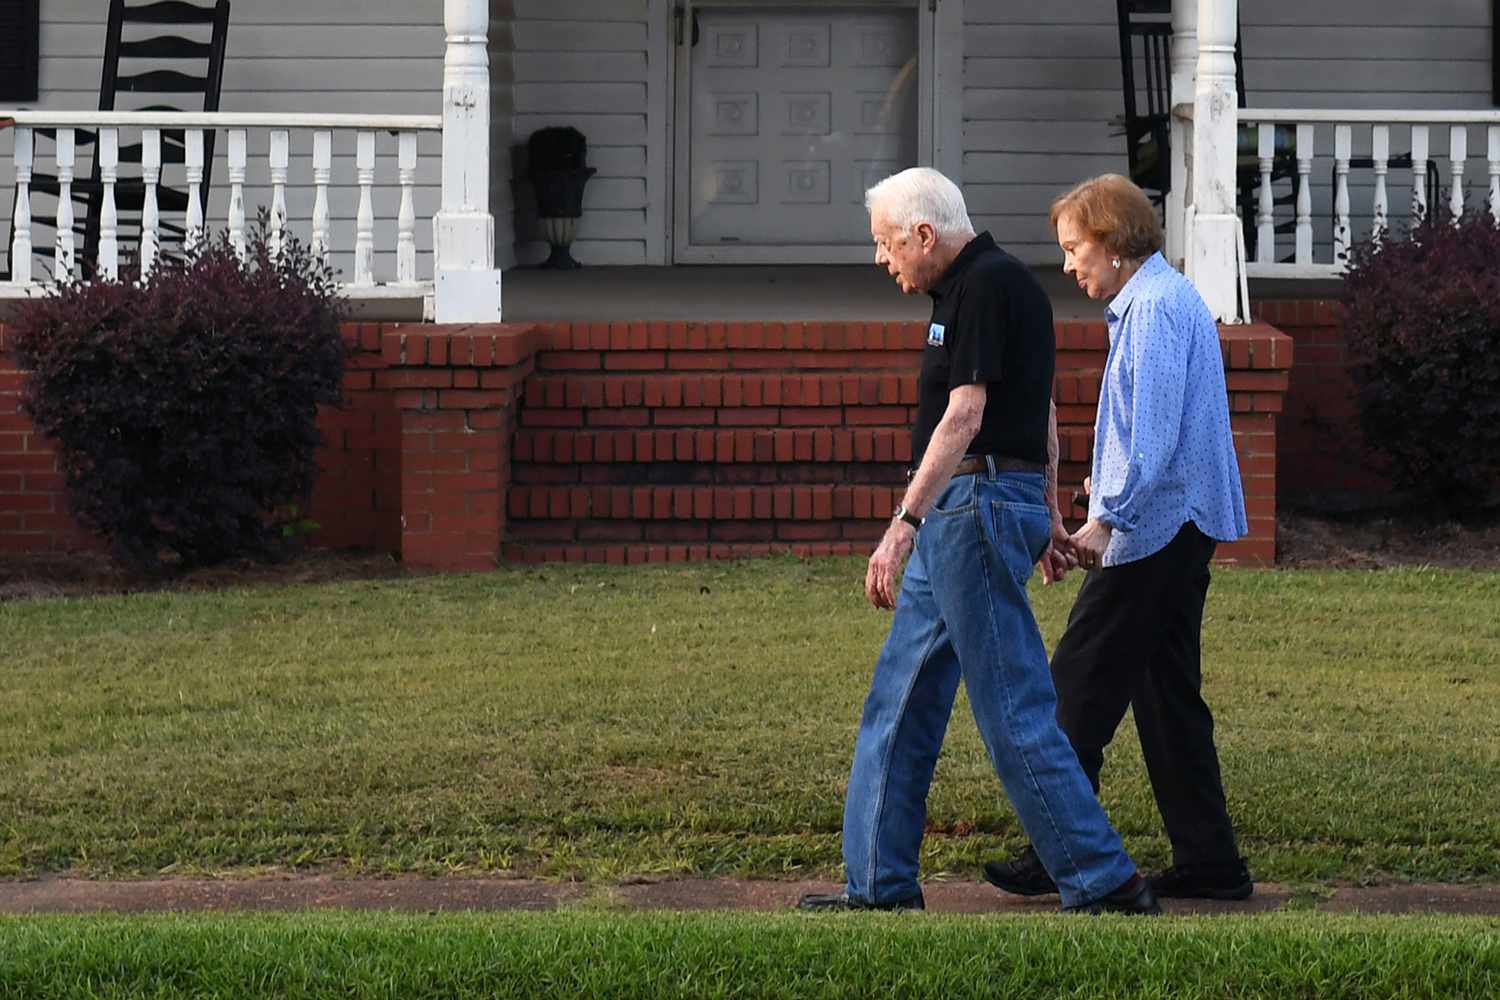 Former President of the United States, Jimmy Carter walks with his wife, former First Lady, Rosalynn Carter along with Secret Service along West Church Street following dinner at a friend's home on Saturday August 04, 2018 in Plains, GA. Born in Plains, GA, President Carter stayed in the town following his presidency